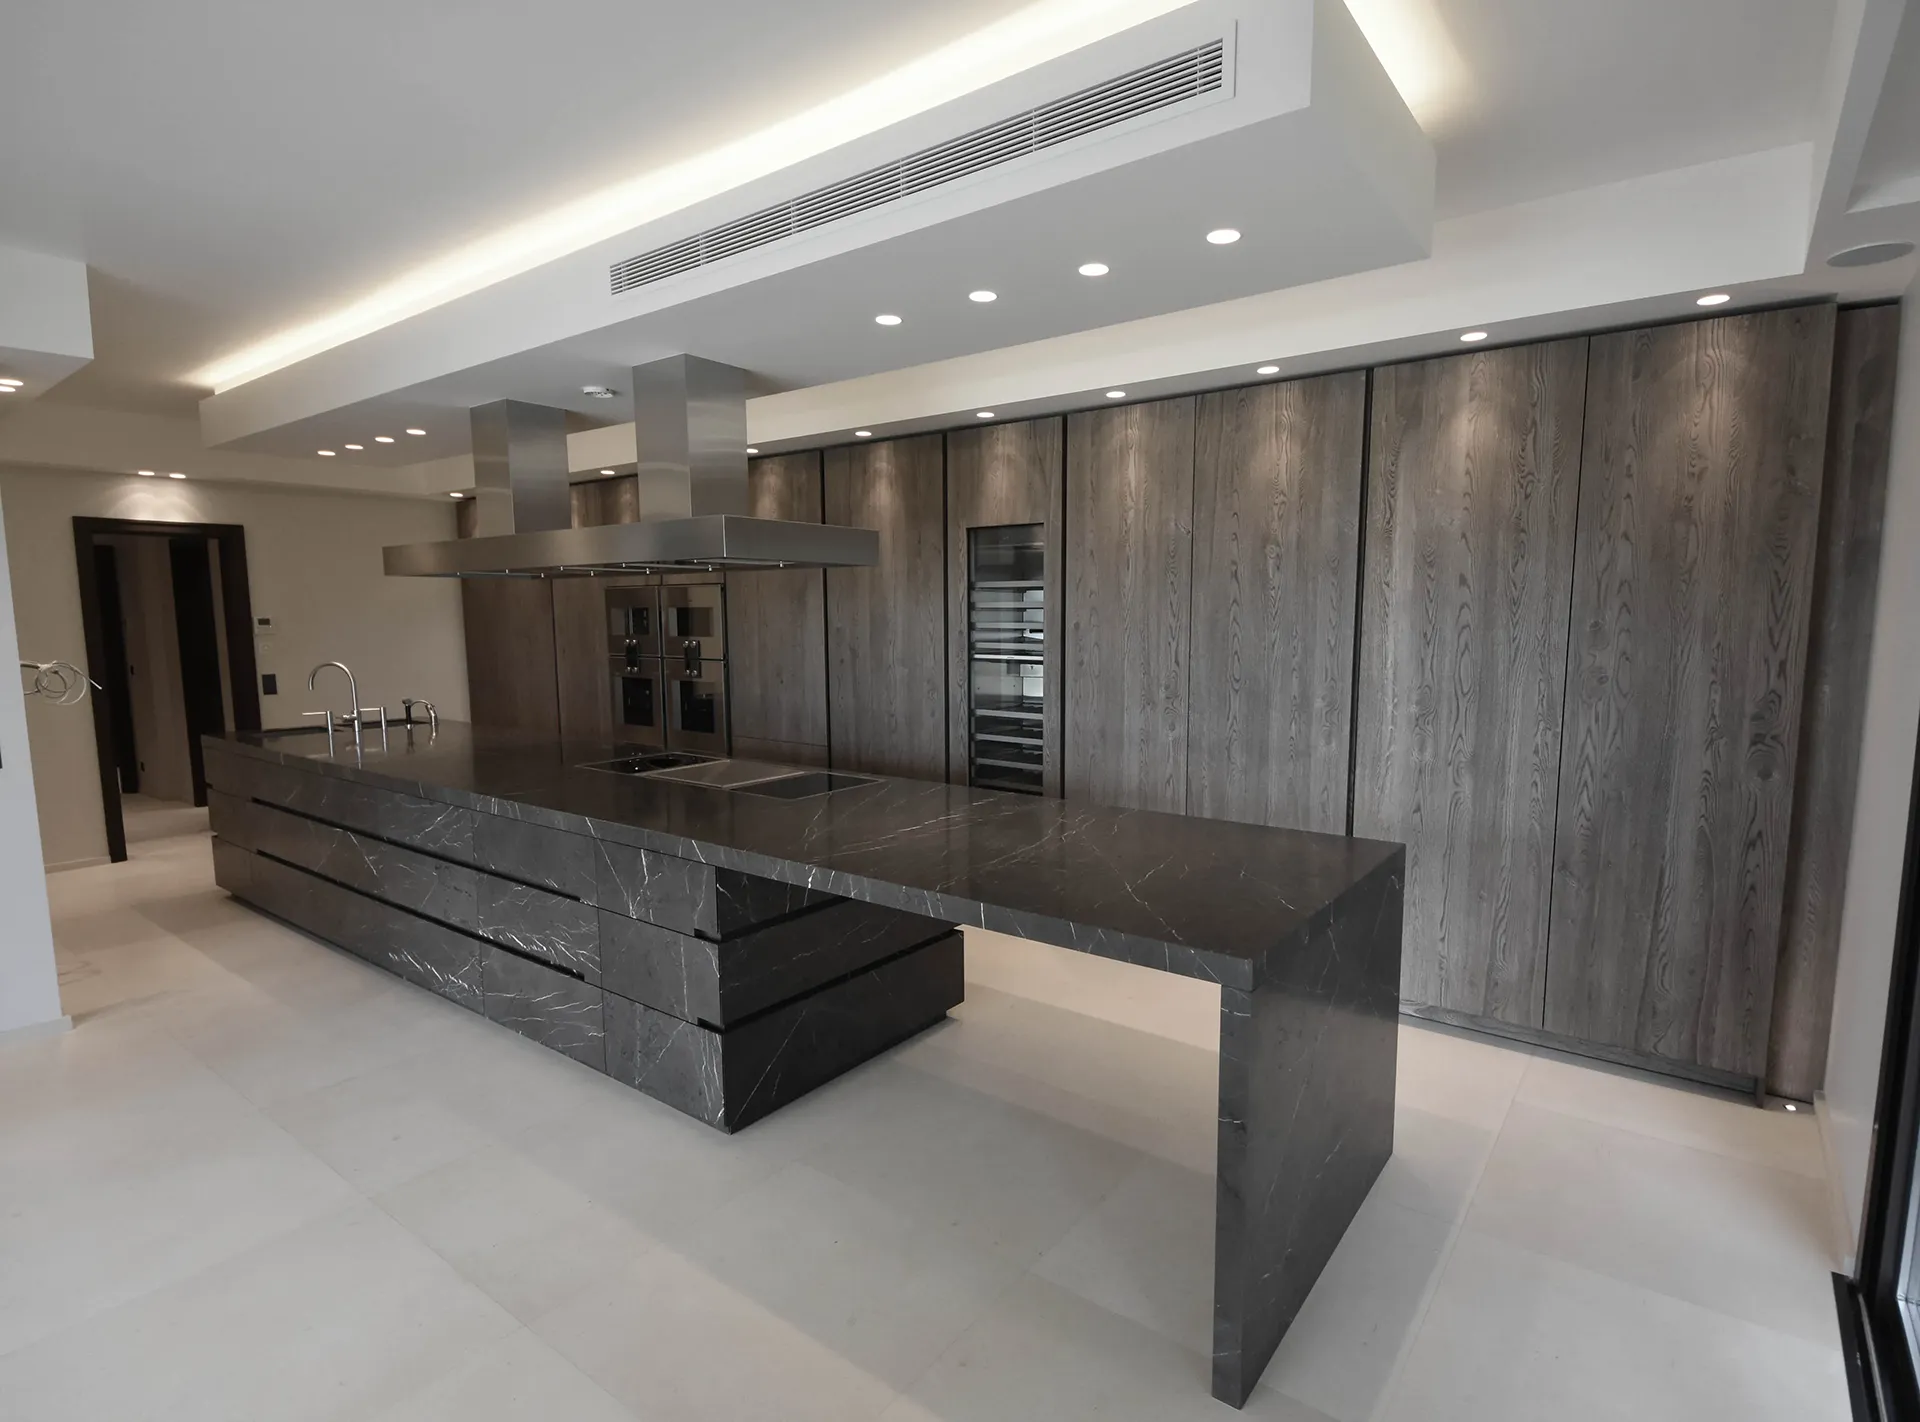 Modern kitchen designed by an architectural firm